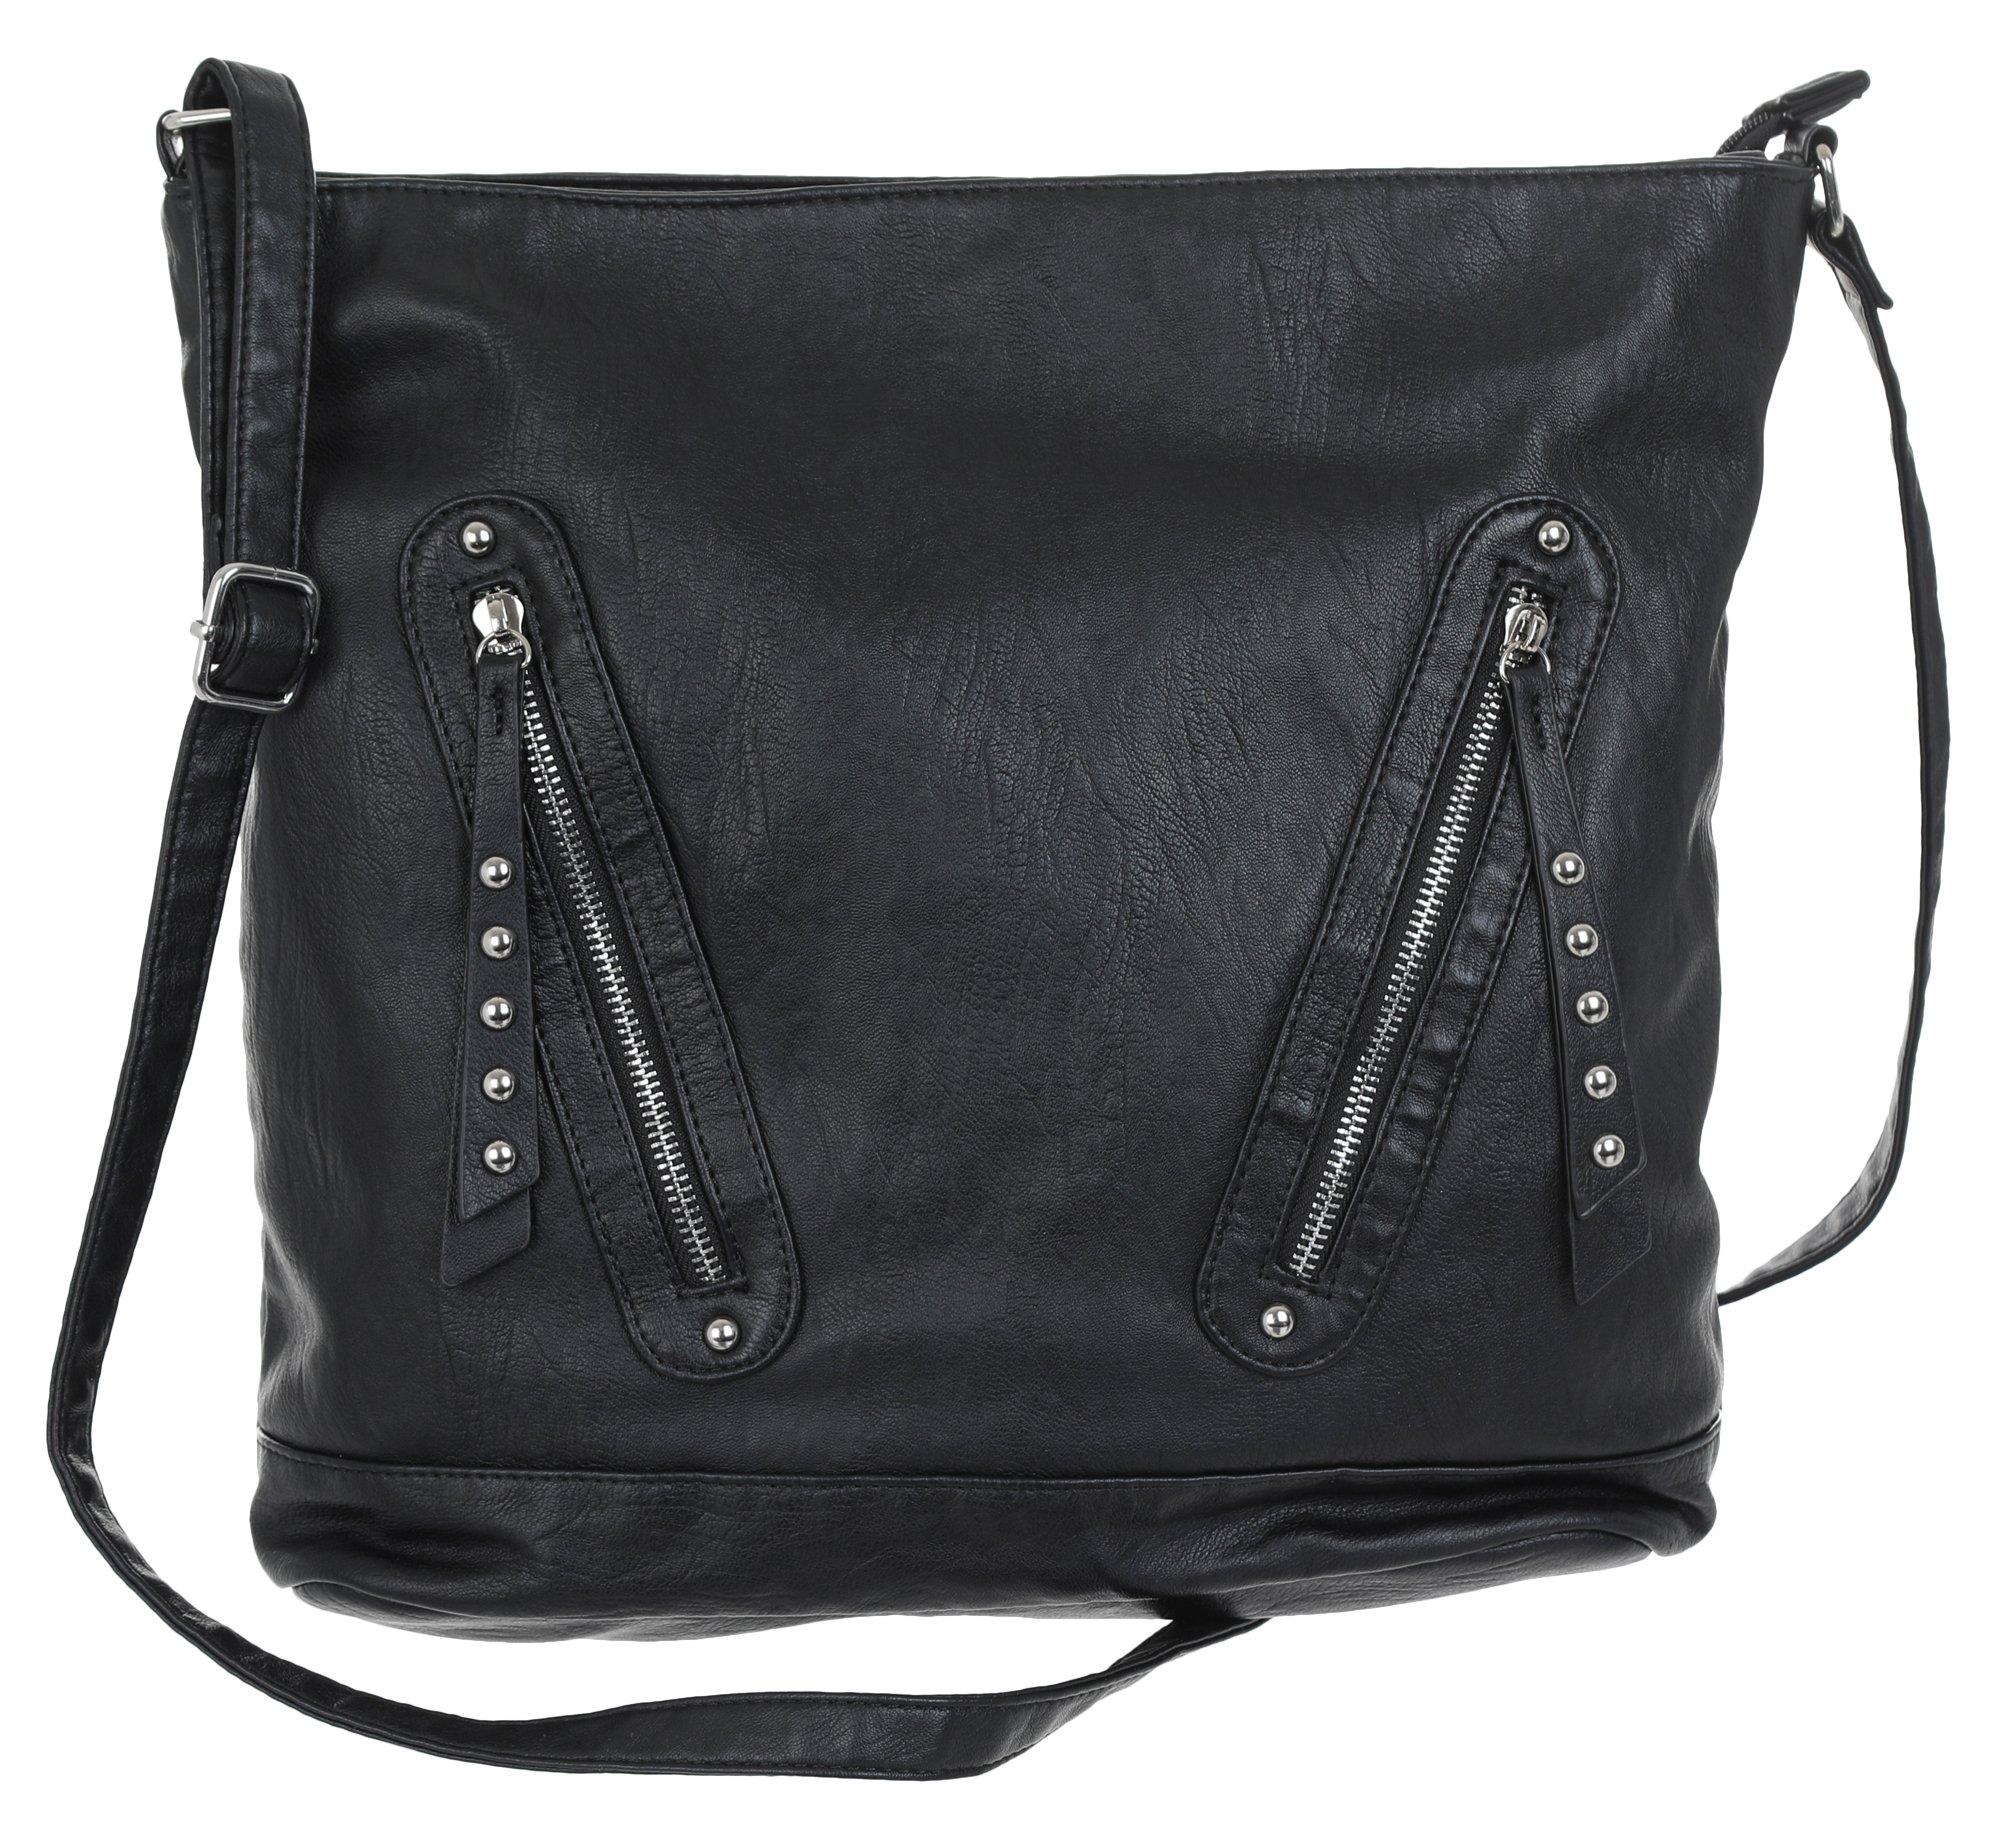 Faux Leather Studded Hobo